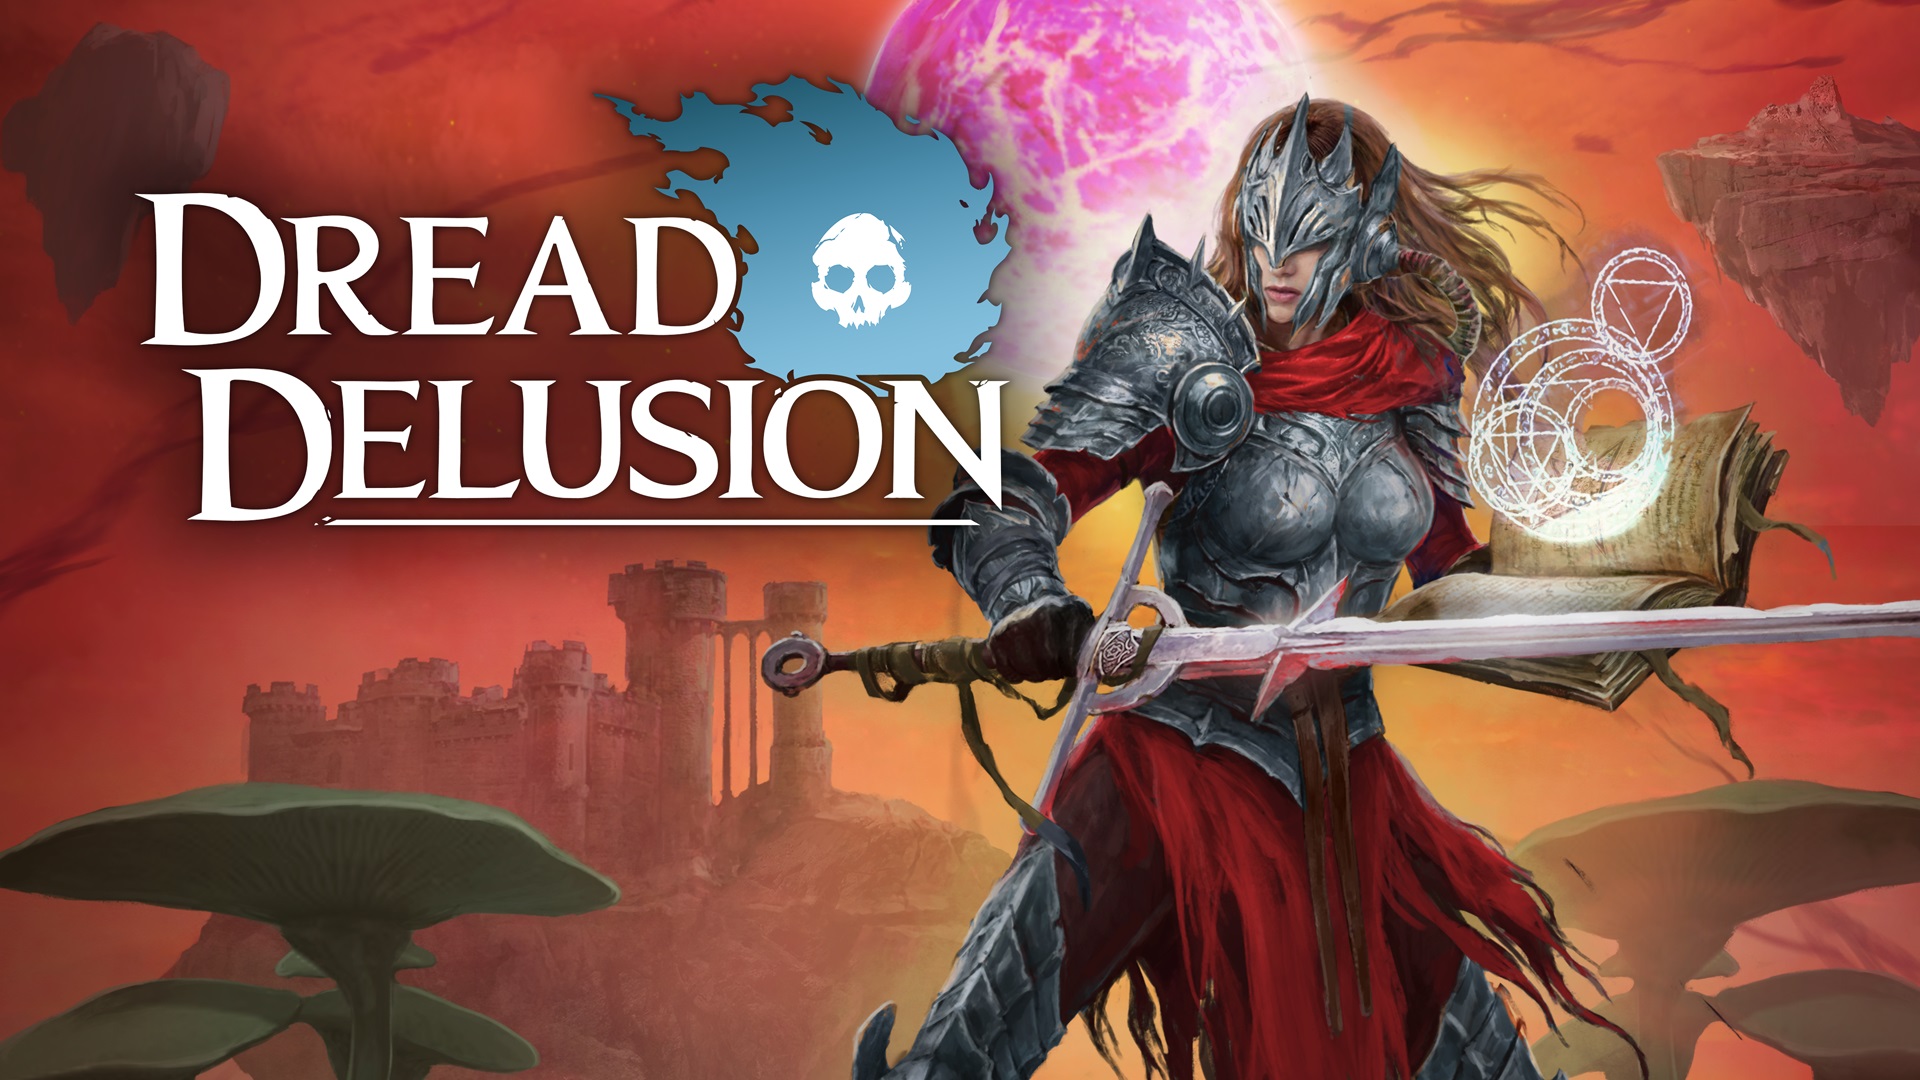 dread delusion featured image